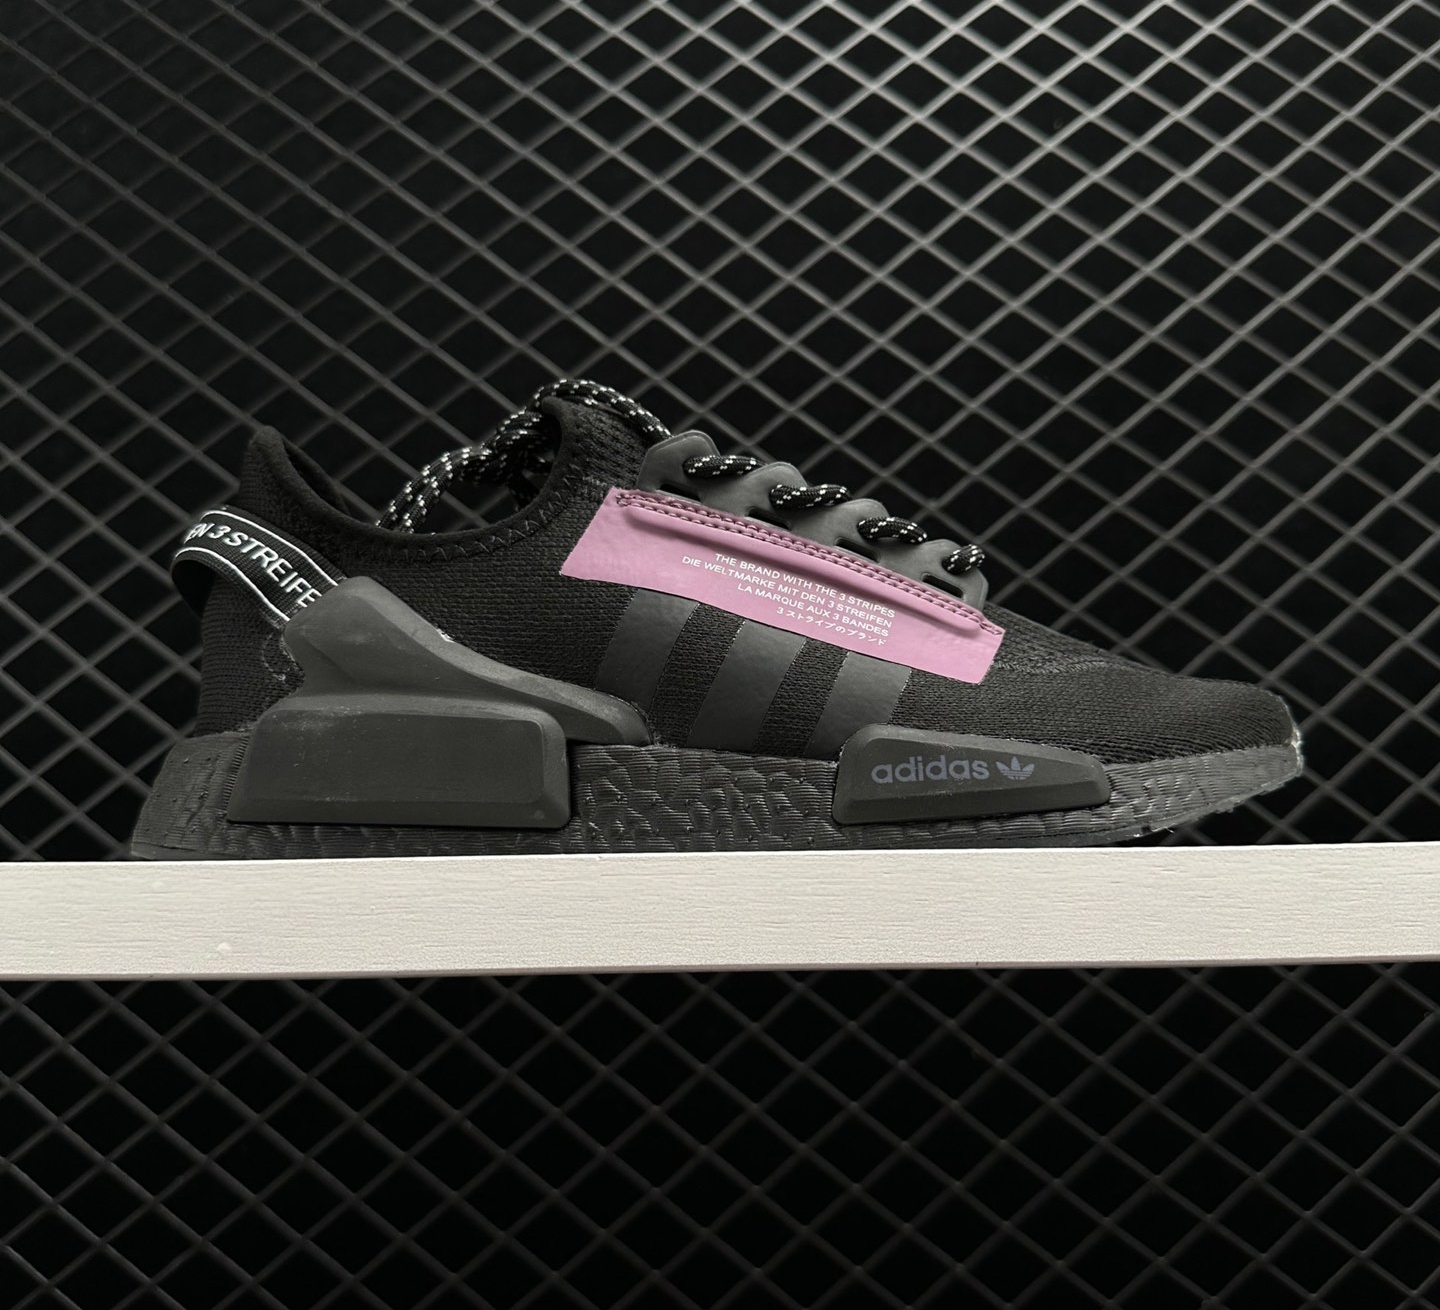 Adidas NMD R1 V2 Black Pink - Stylish Sneakers for Urban Fashion | Limited Stock